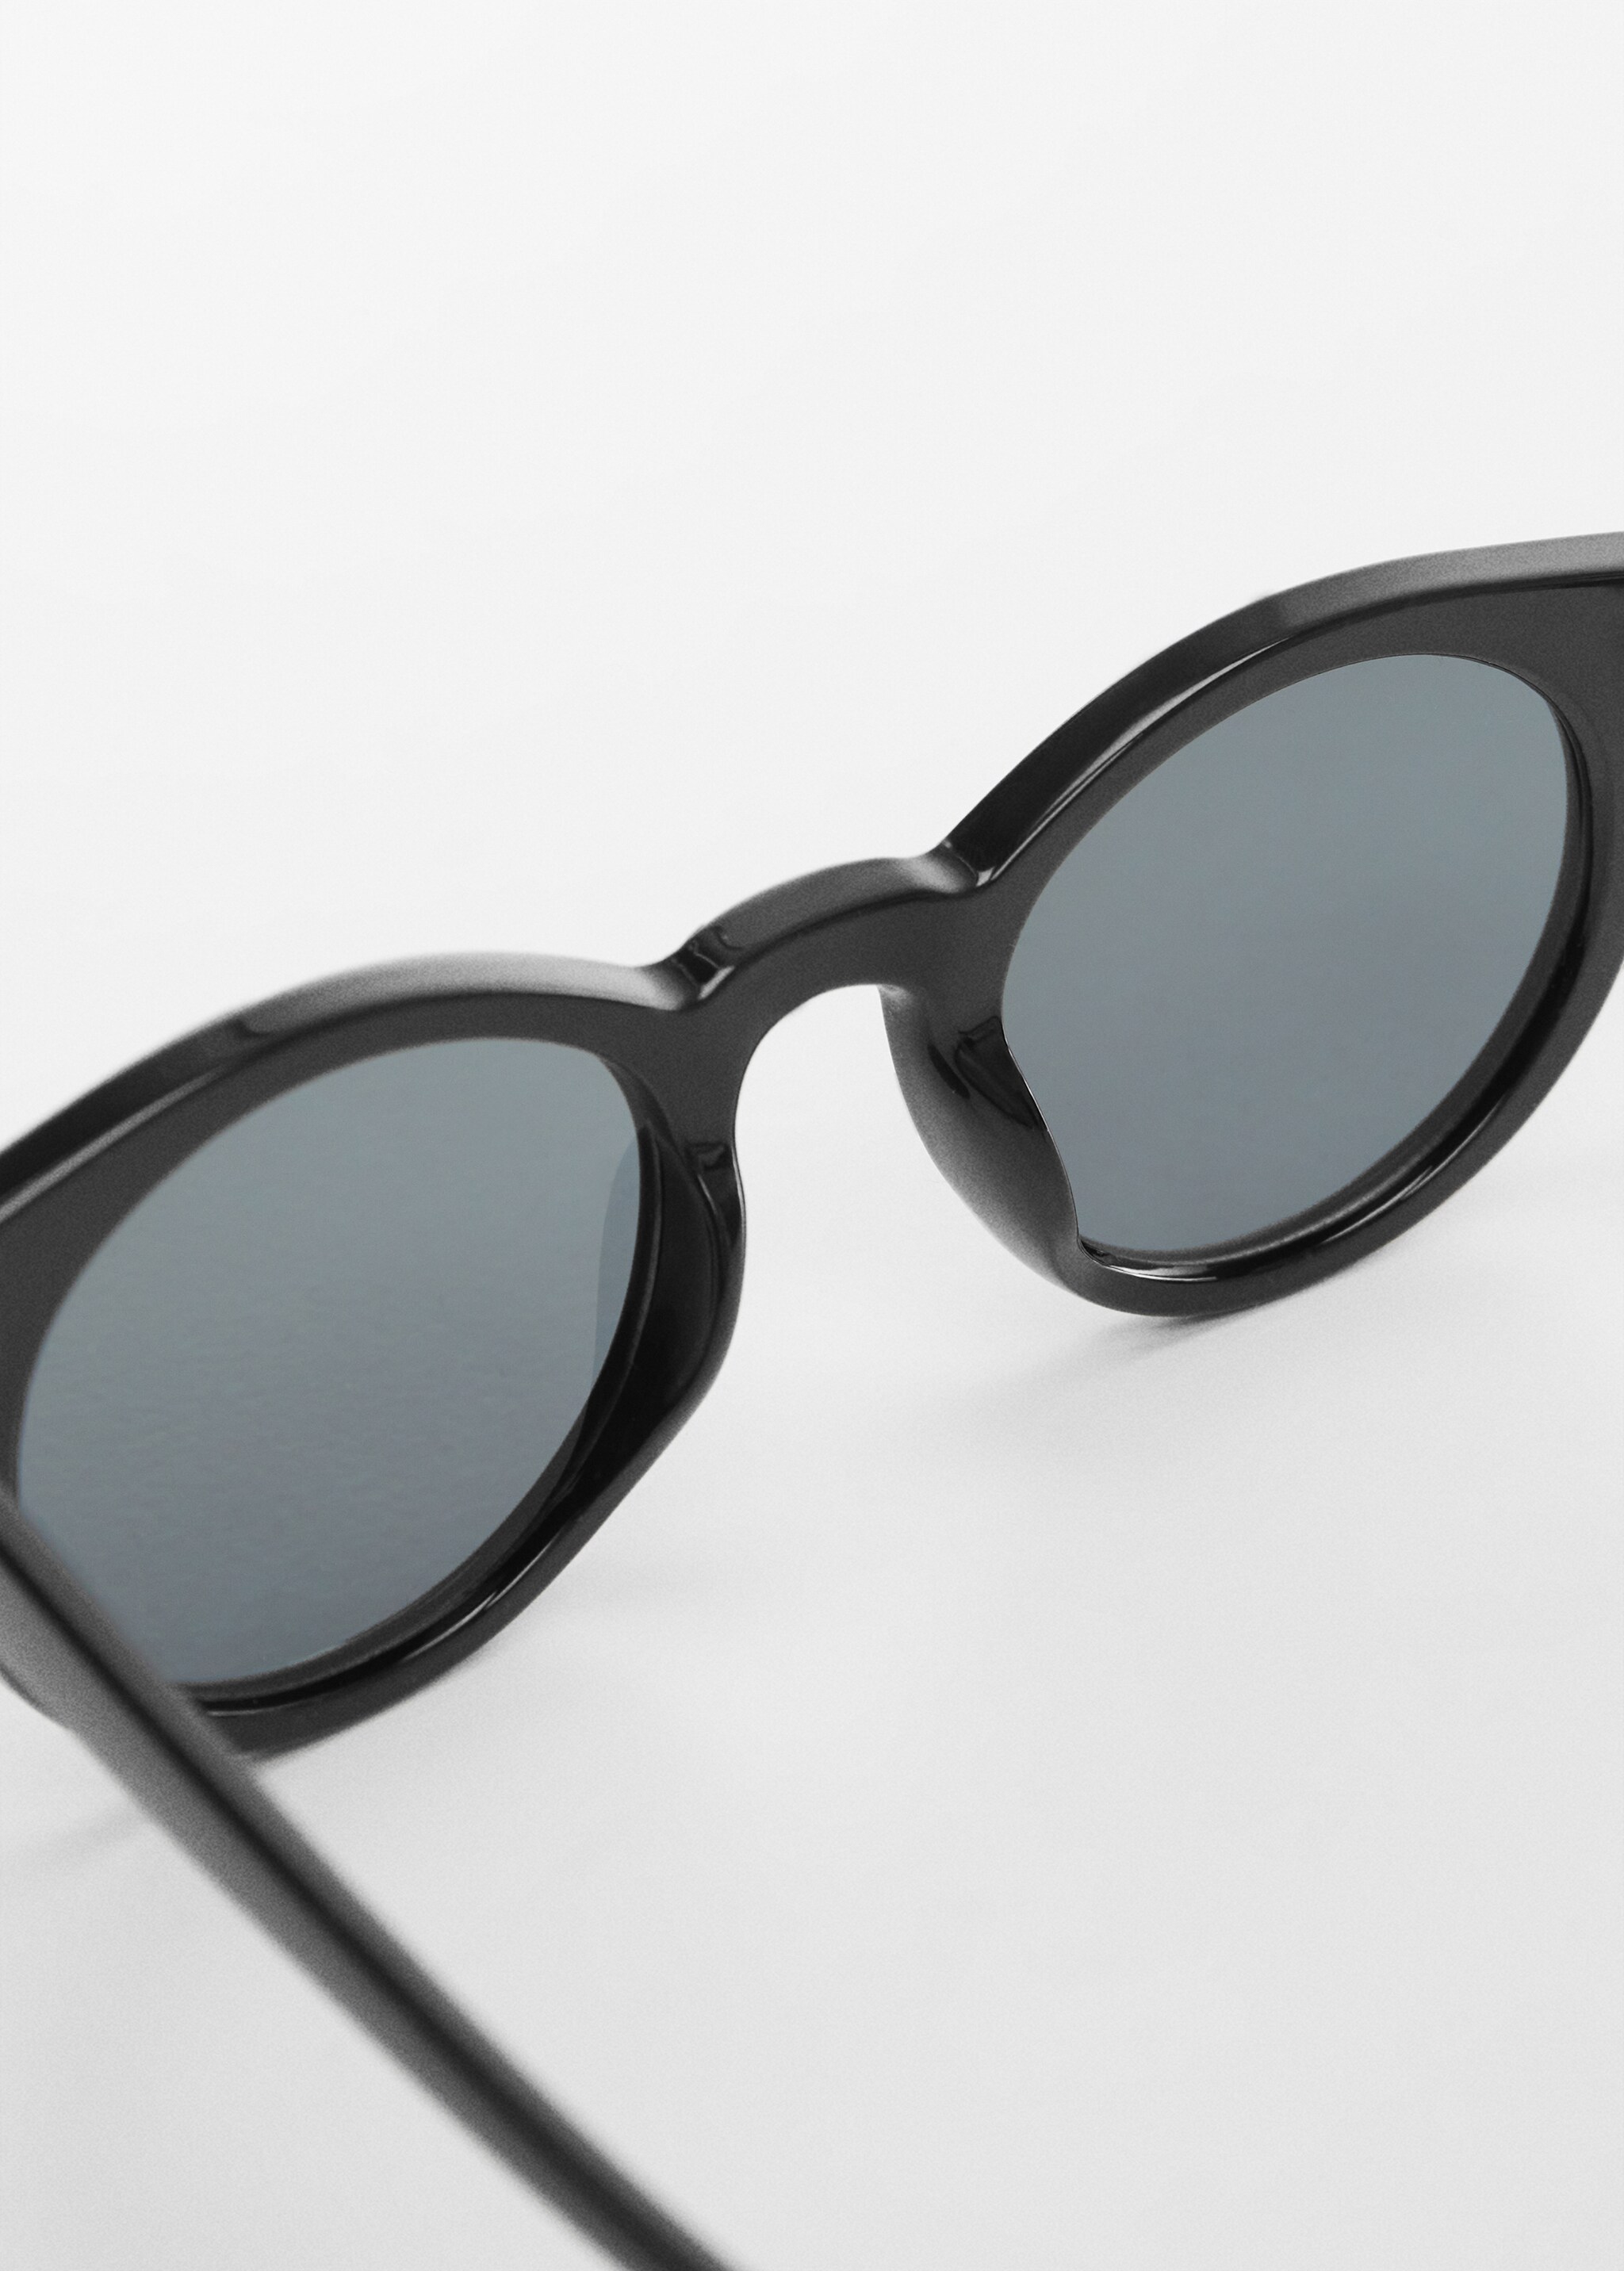 Retro style sunglasses - Details of the article 1